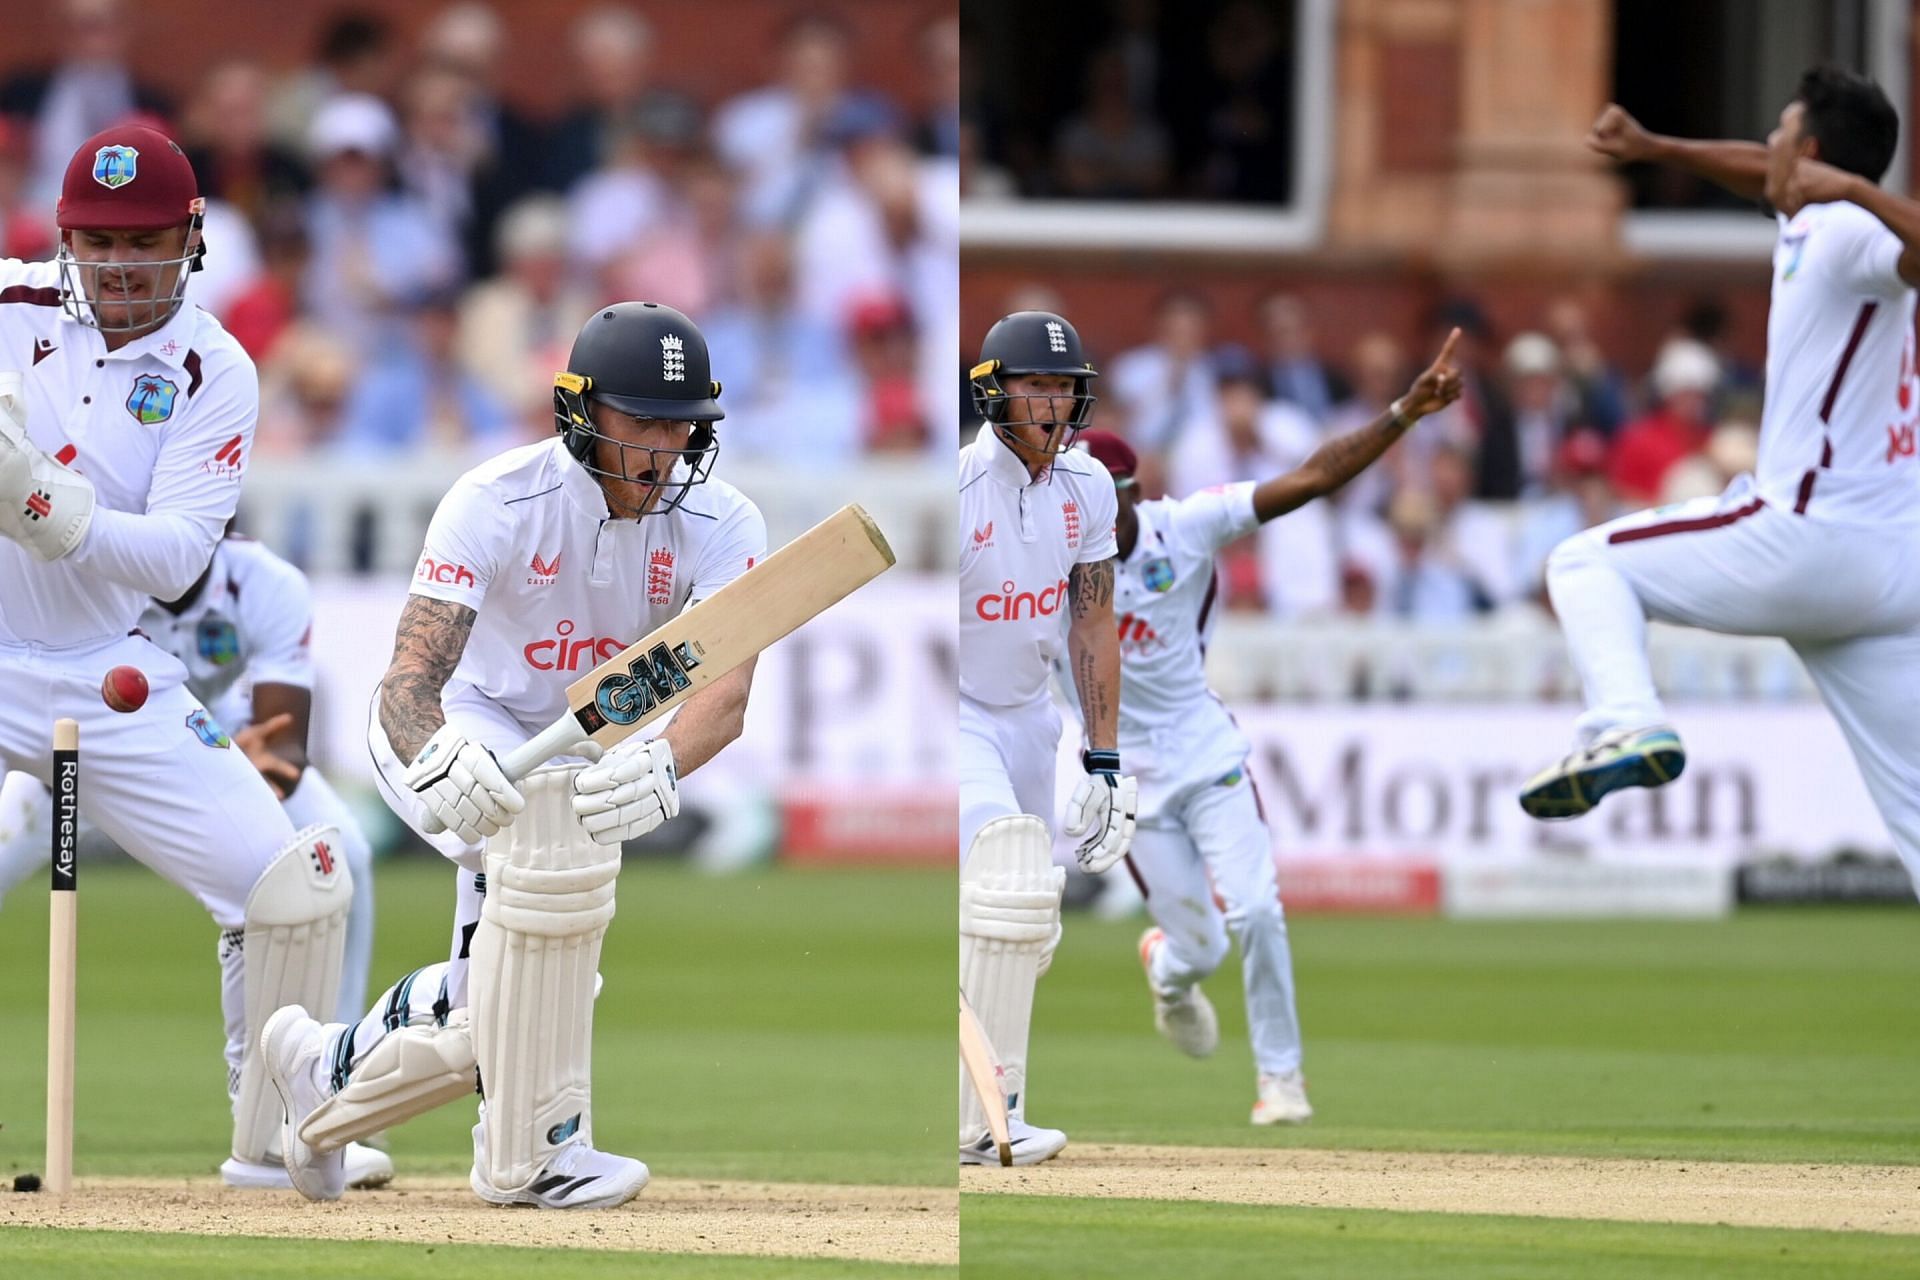 [Watch] Gudakesh Motie cleans up Ben Stokes with a peach in ENG vs WI 1st Test match